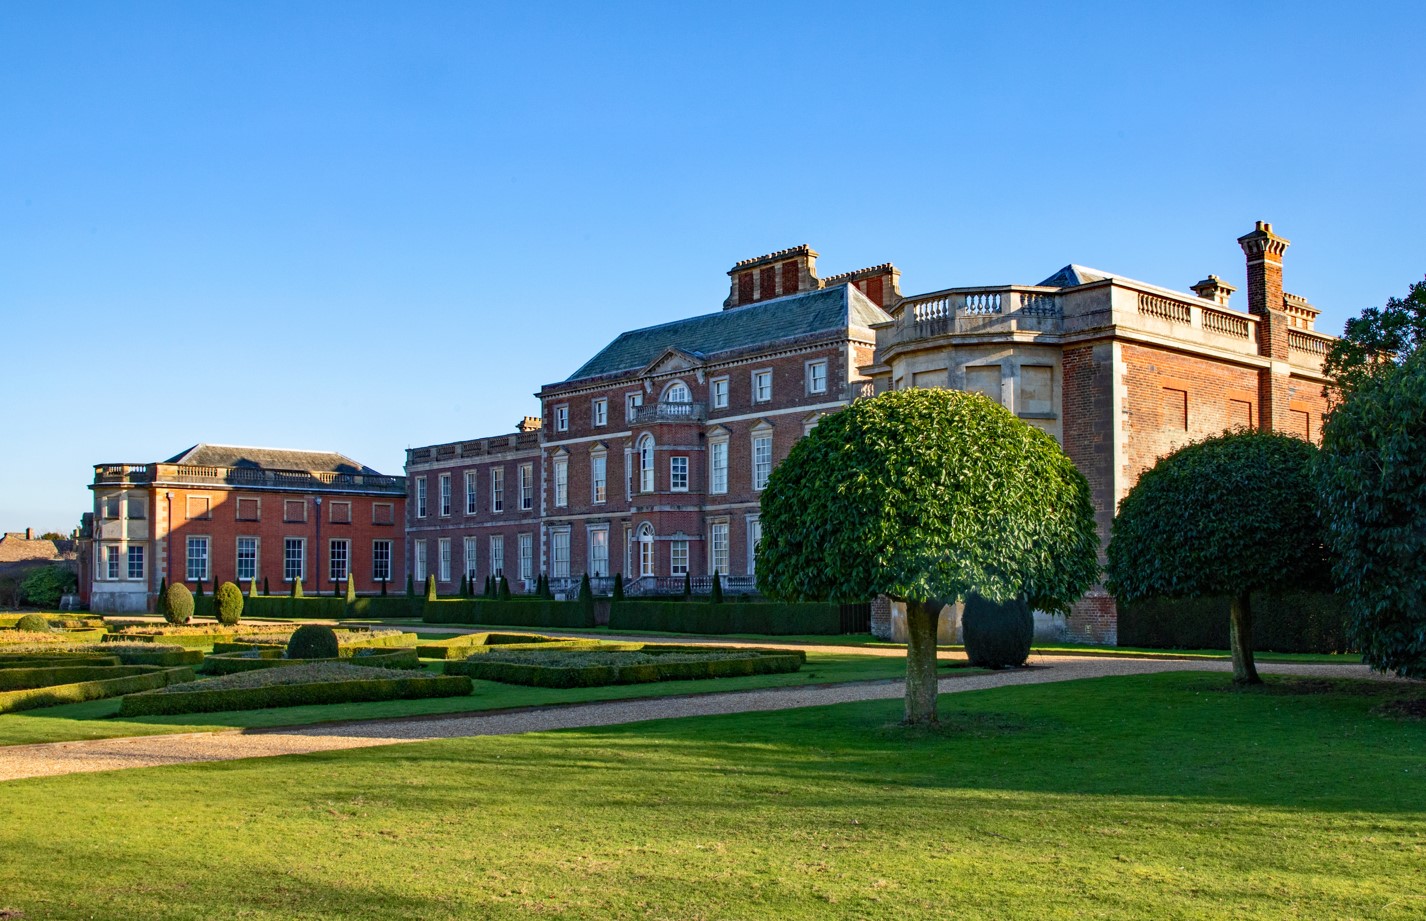 The North Aspect of Wimpole Hall